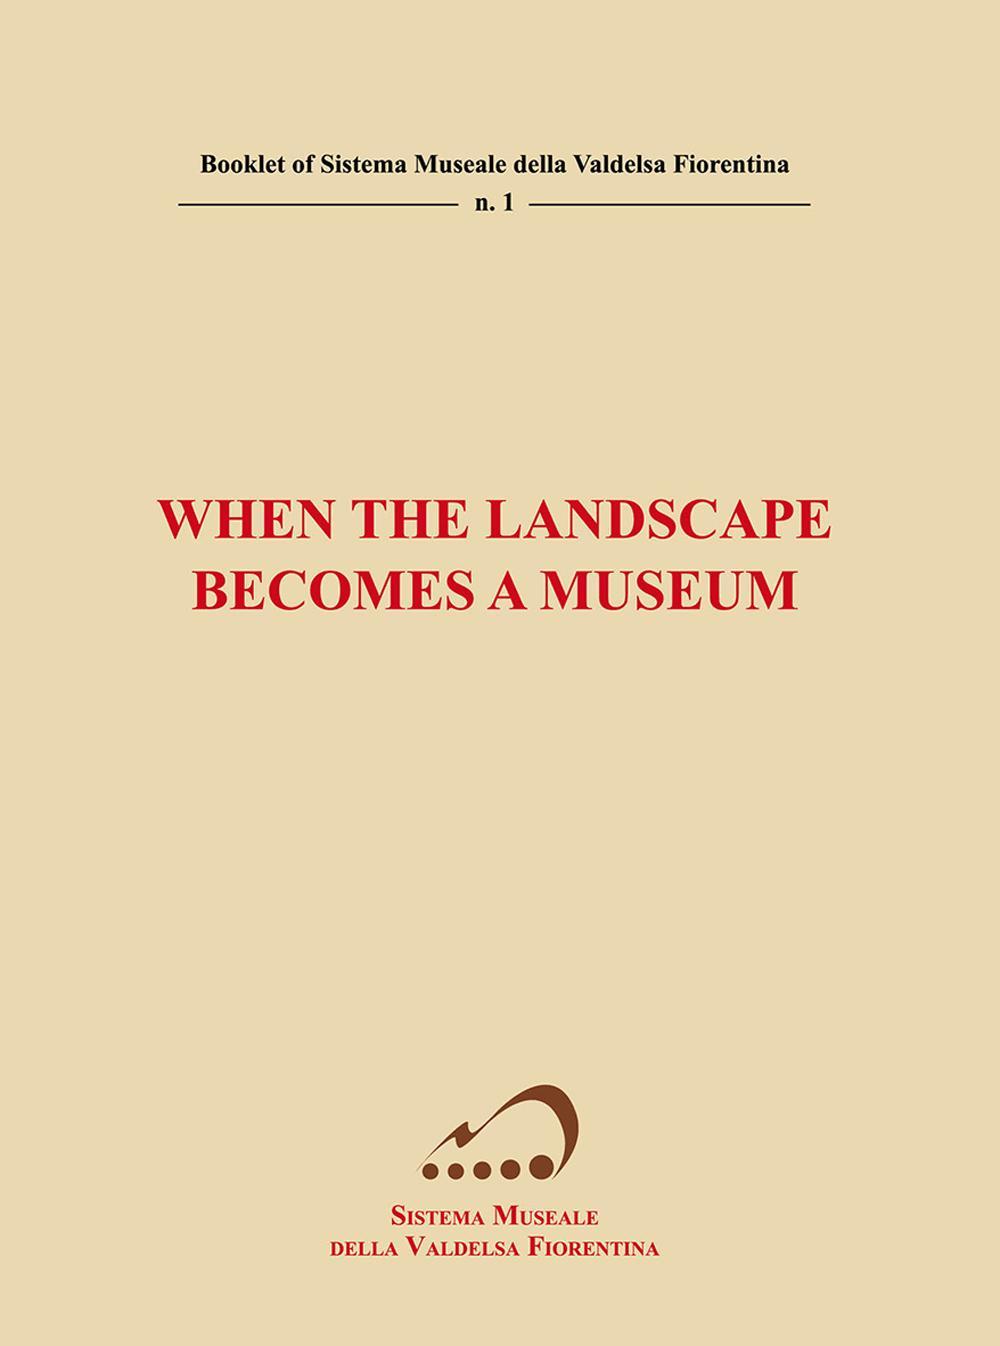 When the landscape becomes a museum